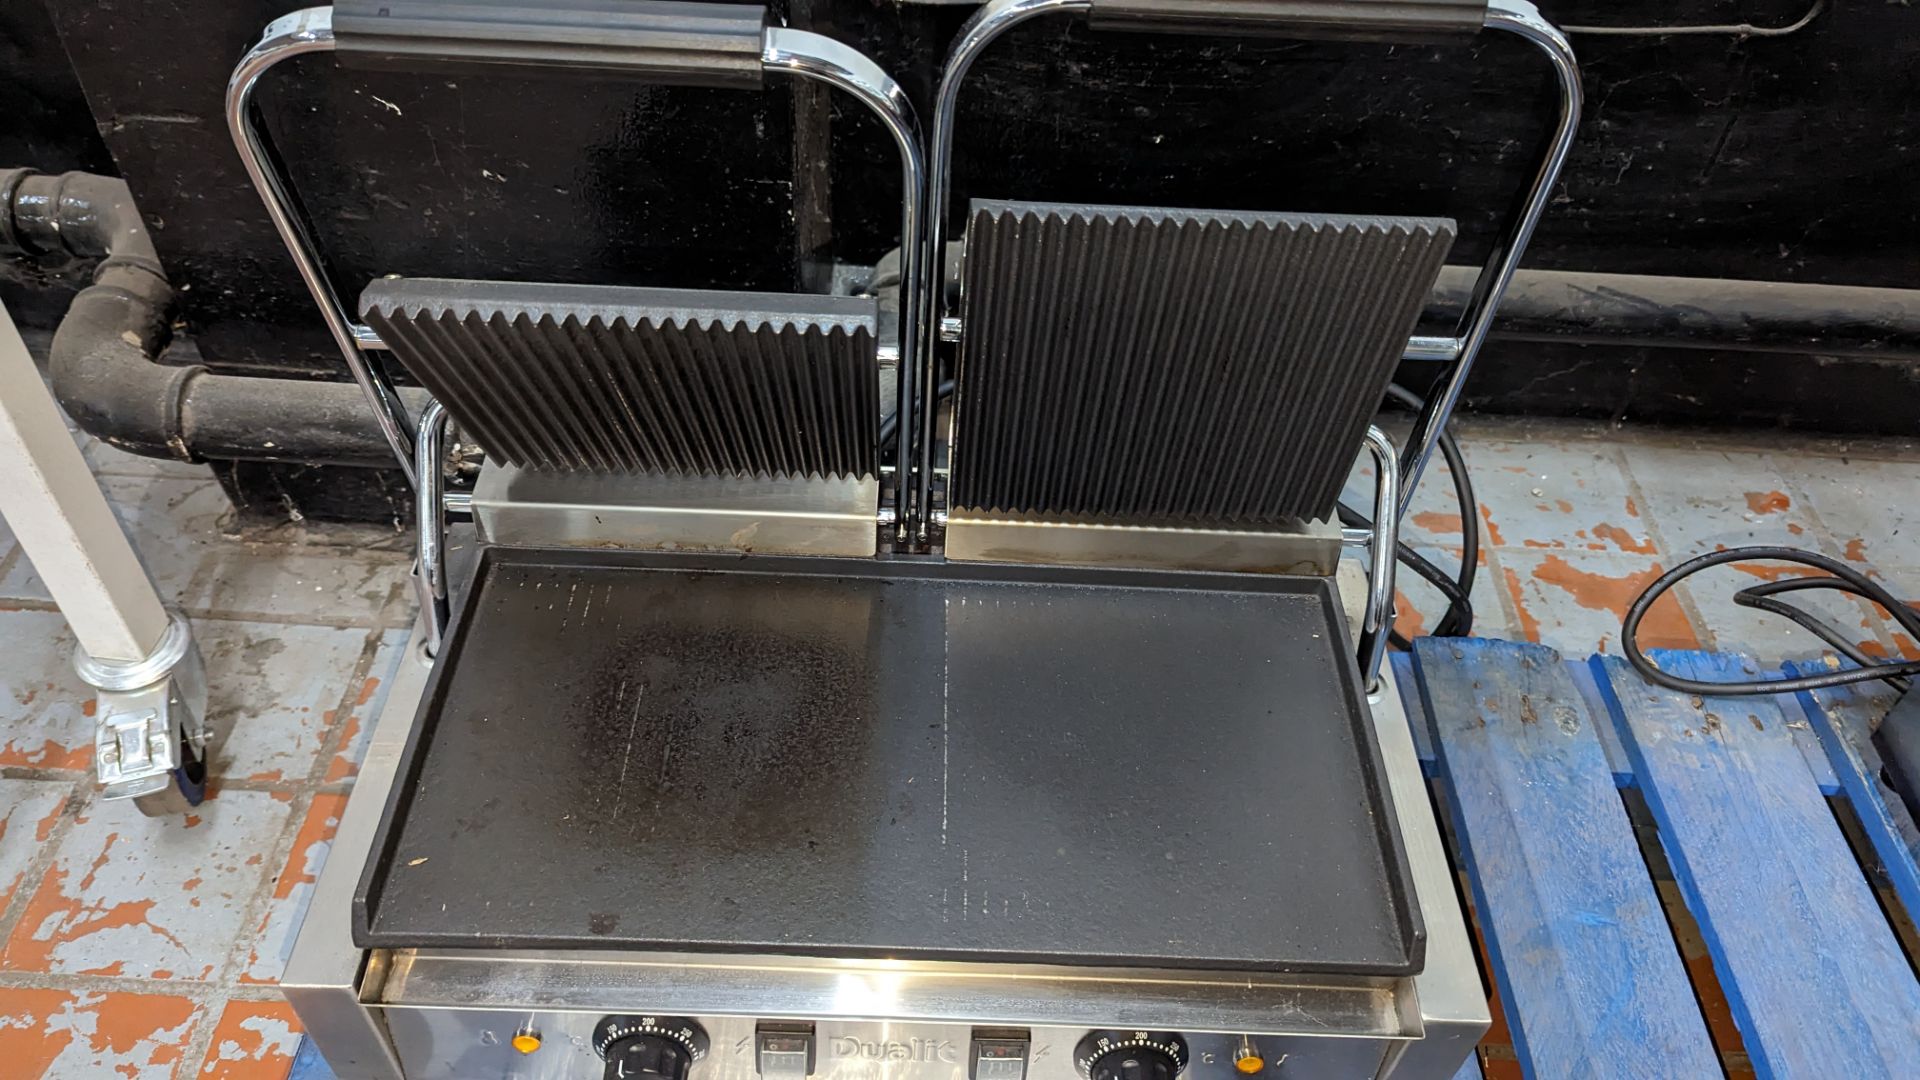 Dualit RCG2 double panini contact grill, including manual - Image 4 of 8